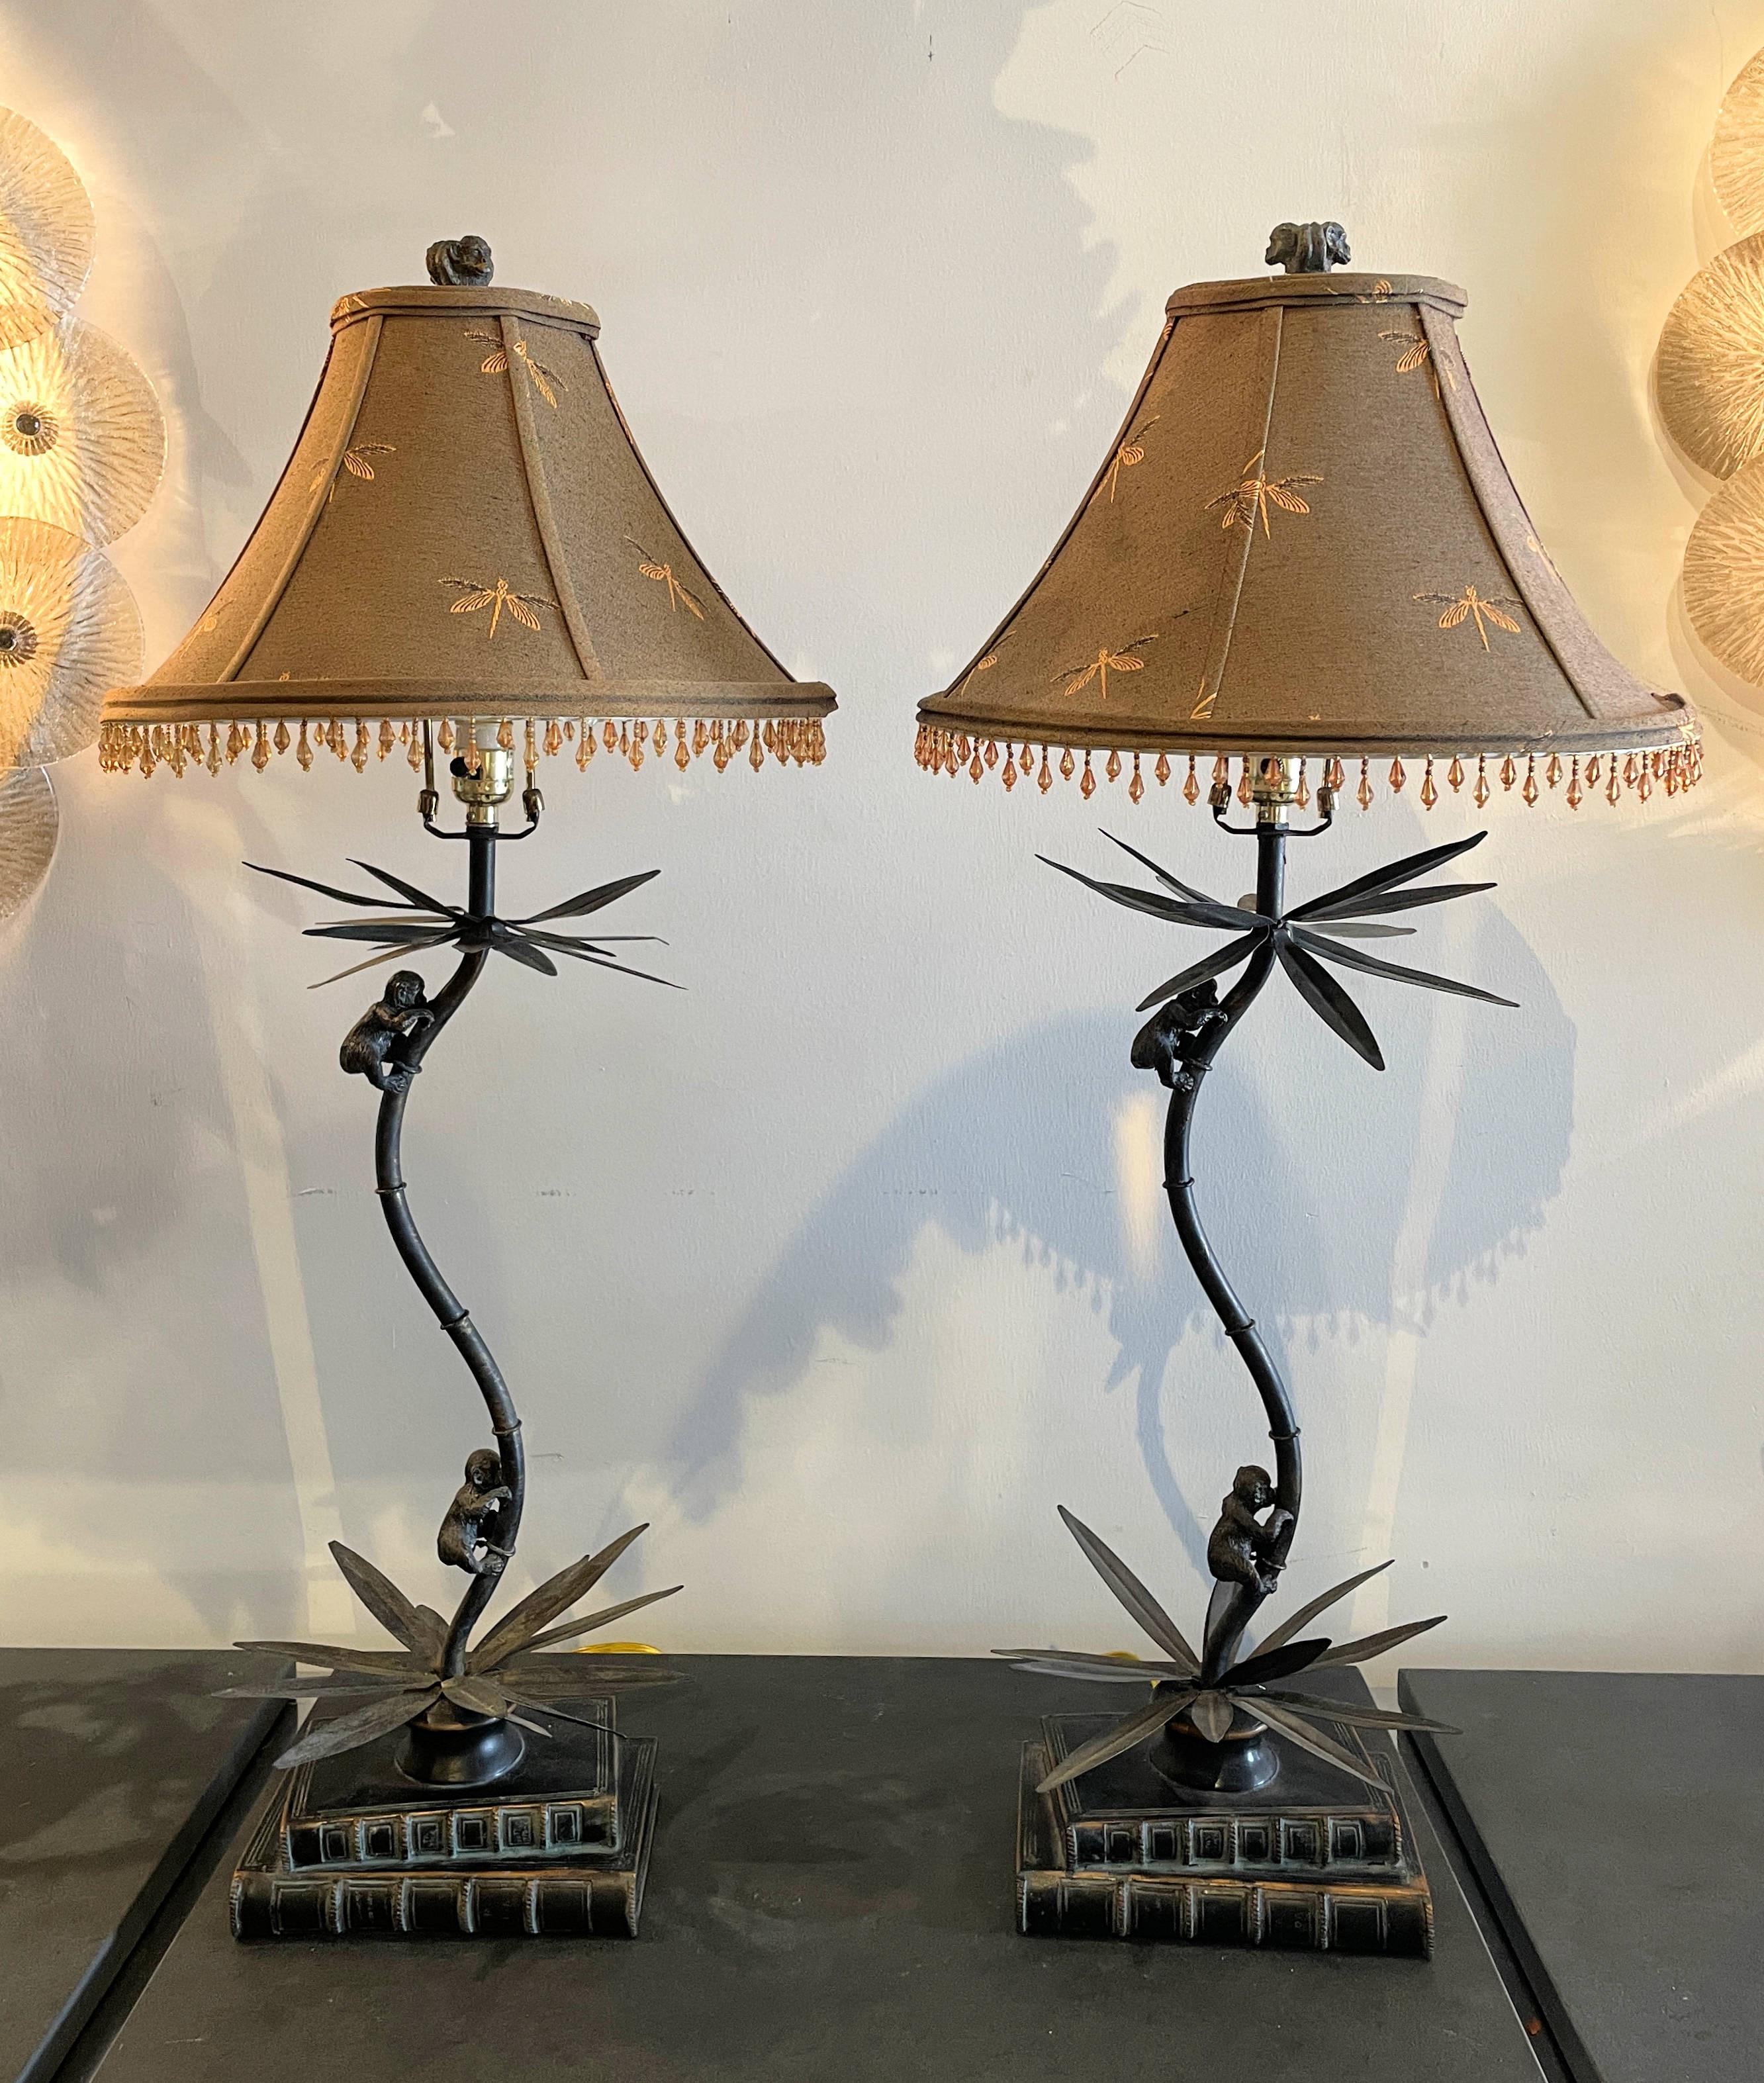 A tropical themed lamp by Maitland Smith. Handmade in America and in the Philippines. The version of the climbing monkeys on a palm tree with the stacked book base is rare. The custom lamp shades with woven dragon flies are adorned with glass beads.